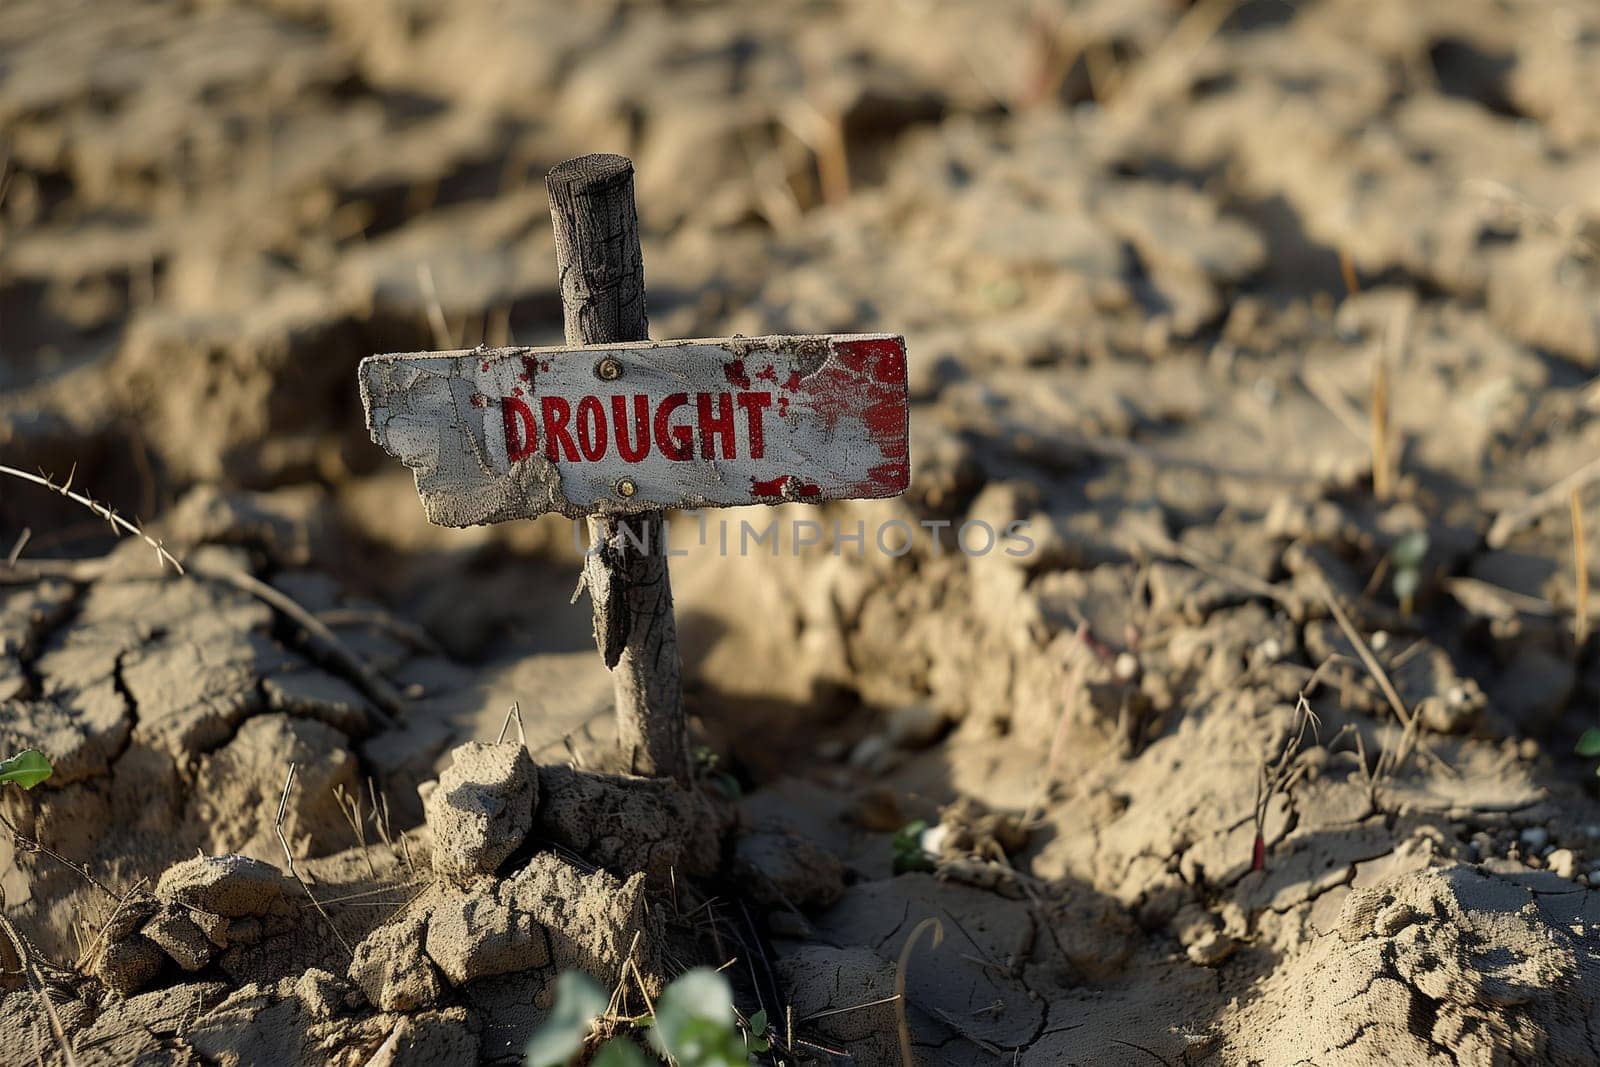 A wooden sign with the word DROUGHT stands prominently amidst a backdrop of parched, cracked soil, symbolizing the severity of water scarcity.